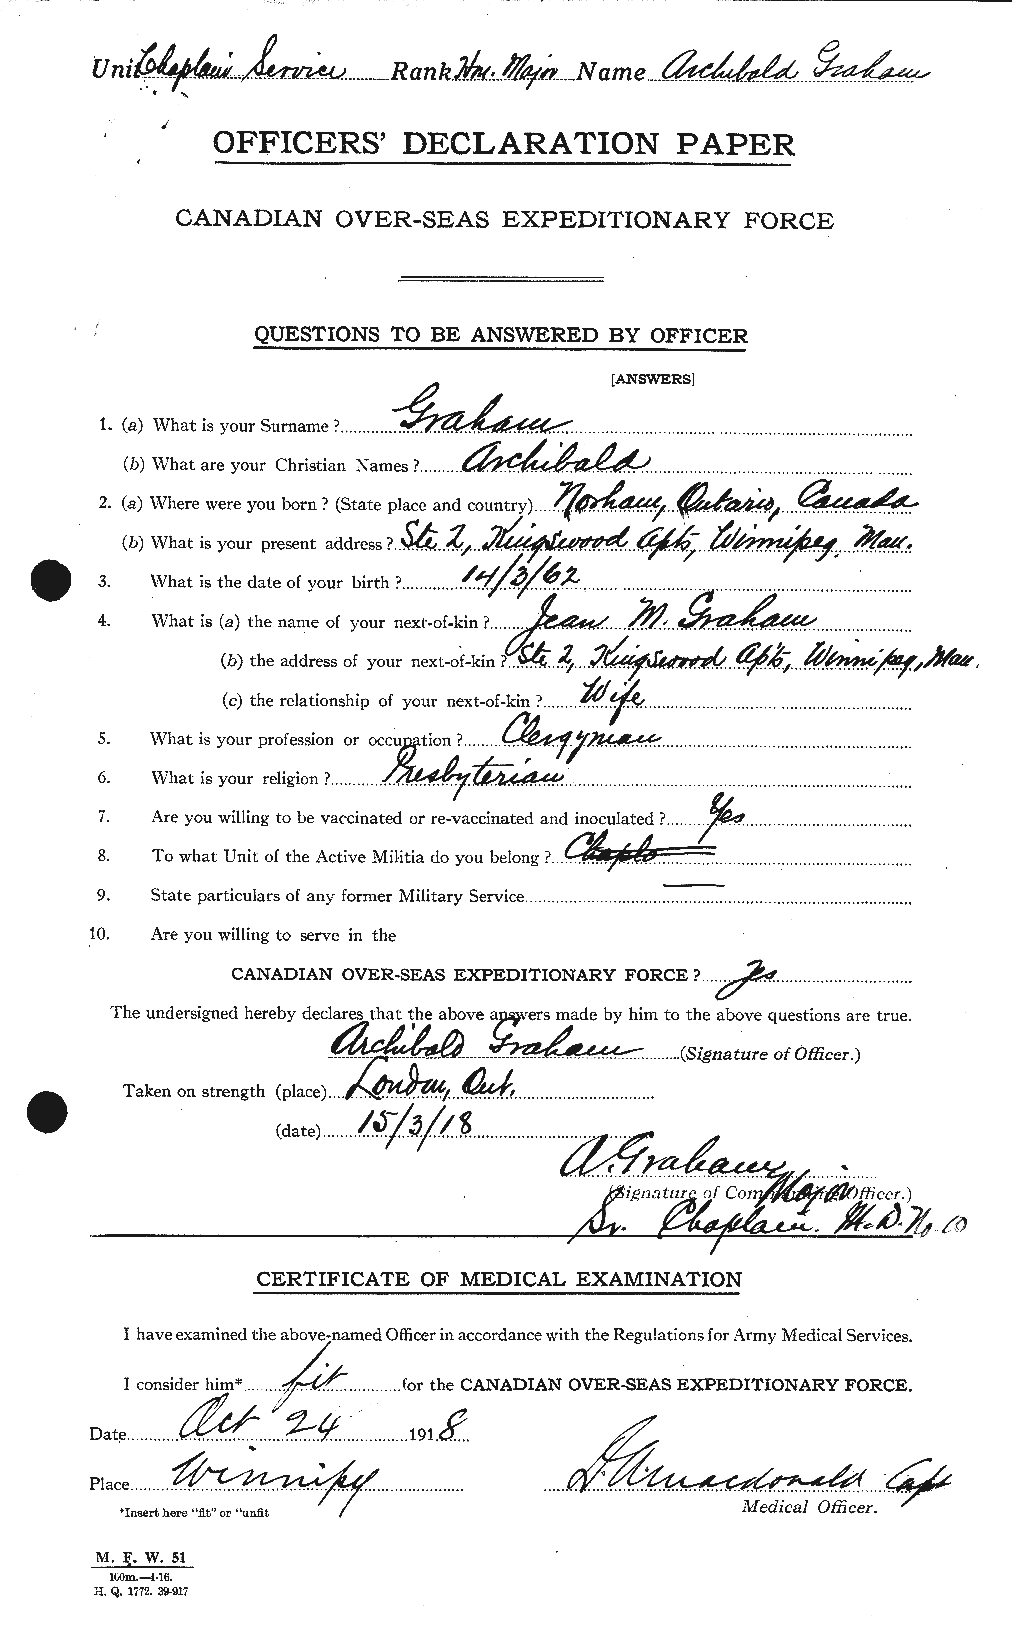 Personnel Records of the First World War - CEF 359630a